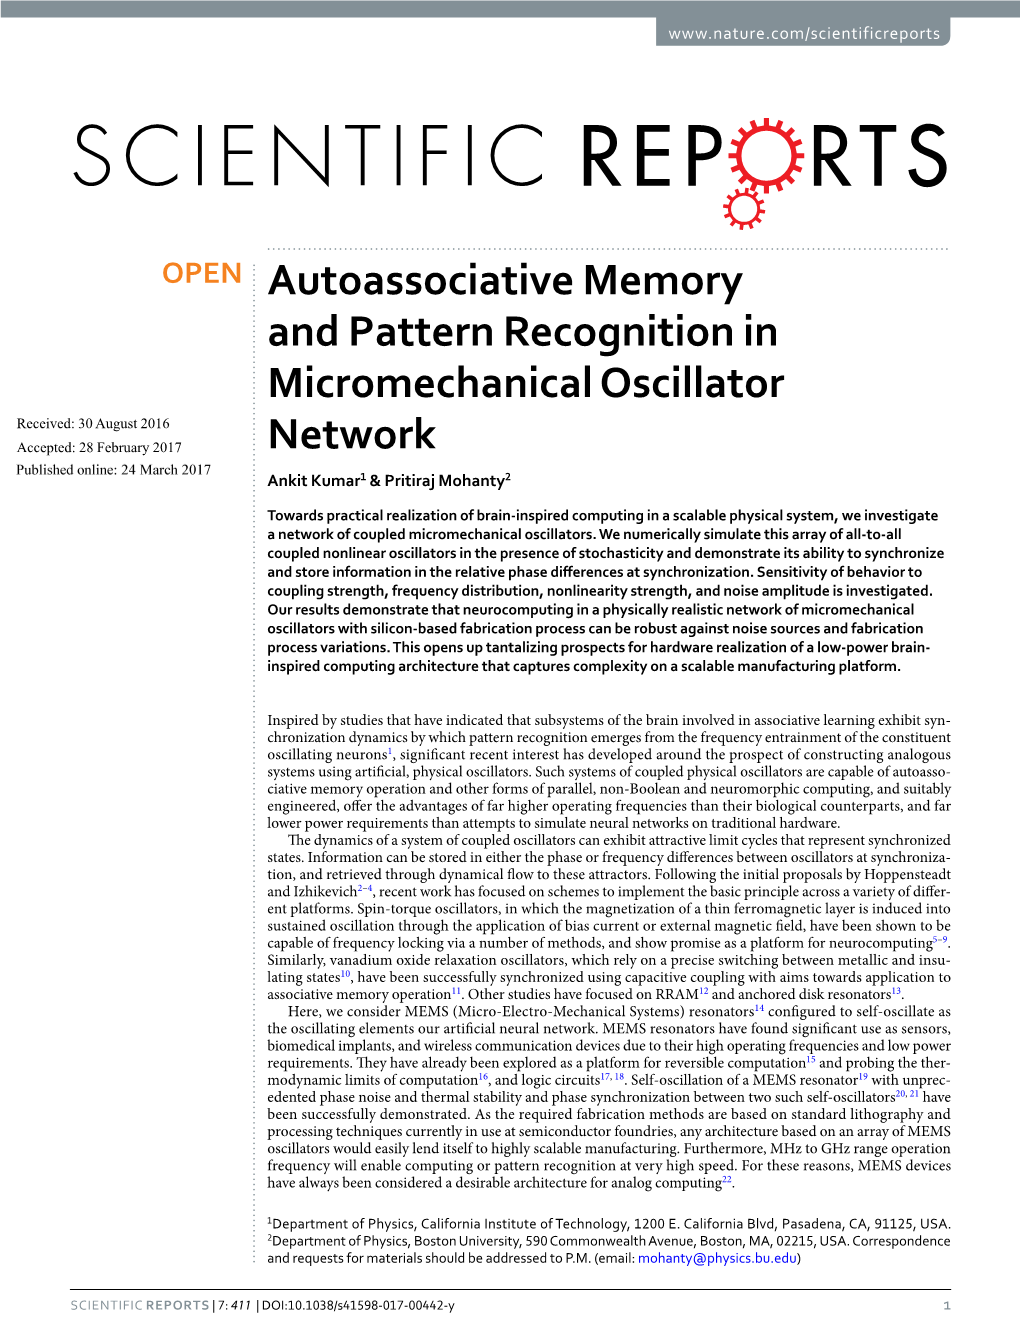 Autoassociative Memory and Pattern Recognition in Micromechanical